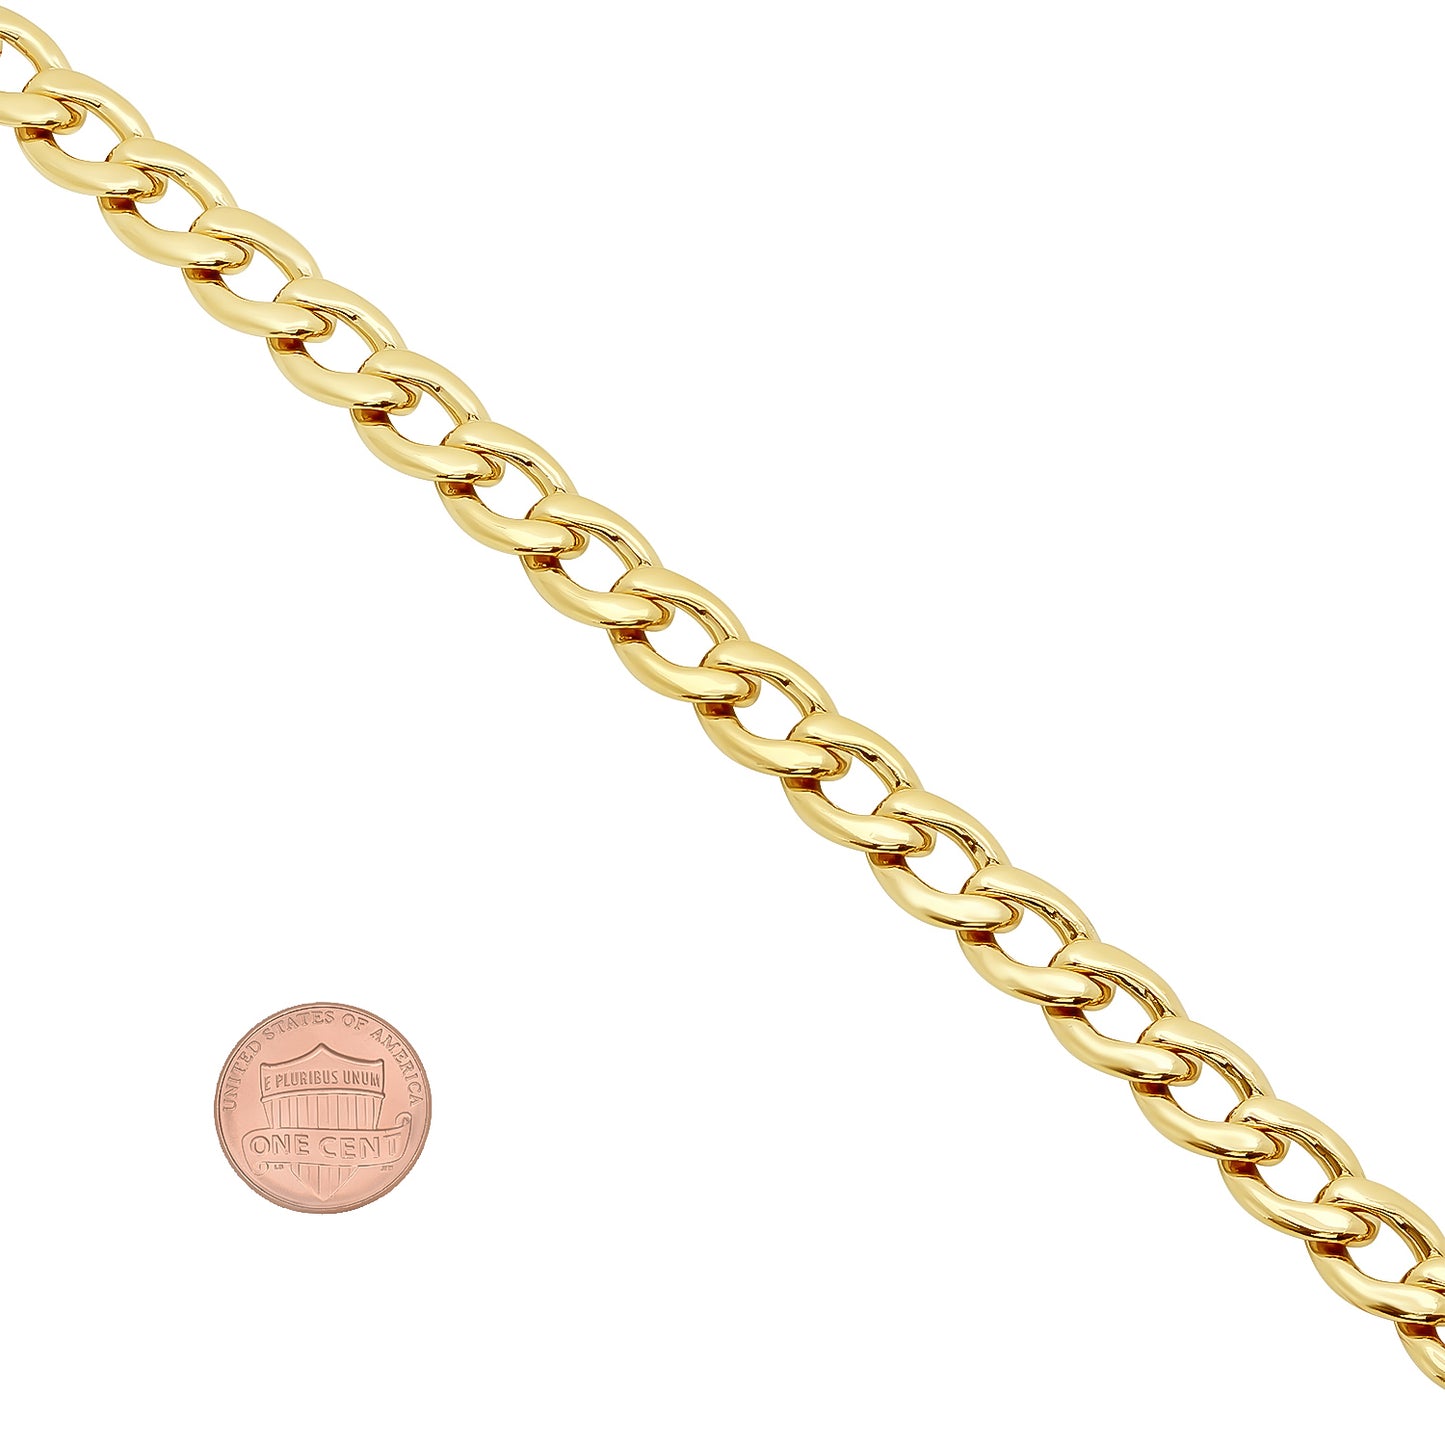 7mm-9mm 0.25 mils (6 microns) 14k Yellow Gold Plated Cuban Link Curb Chain Necklace or Bracelet, 16'-36' (SKU: GL-CURB-ROUNDED)